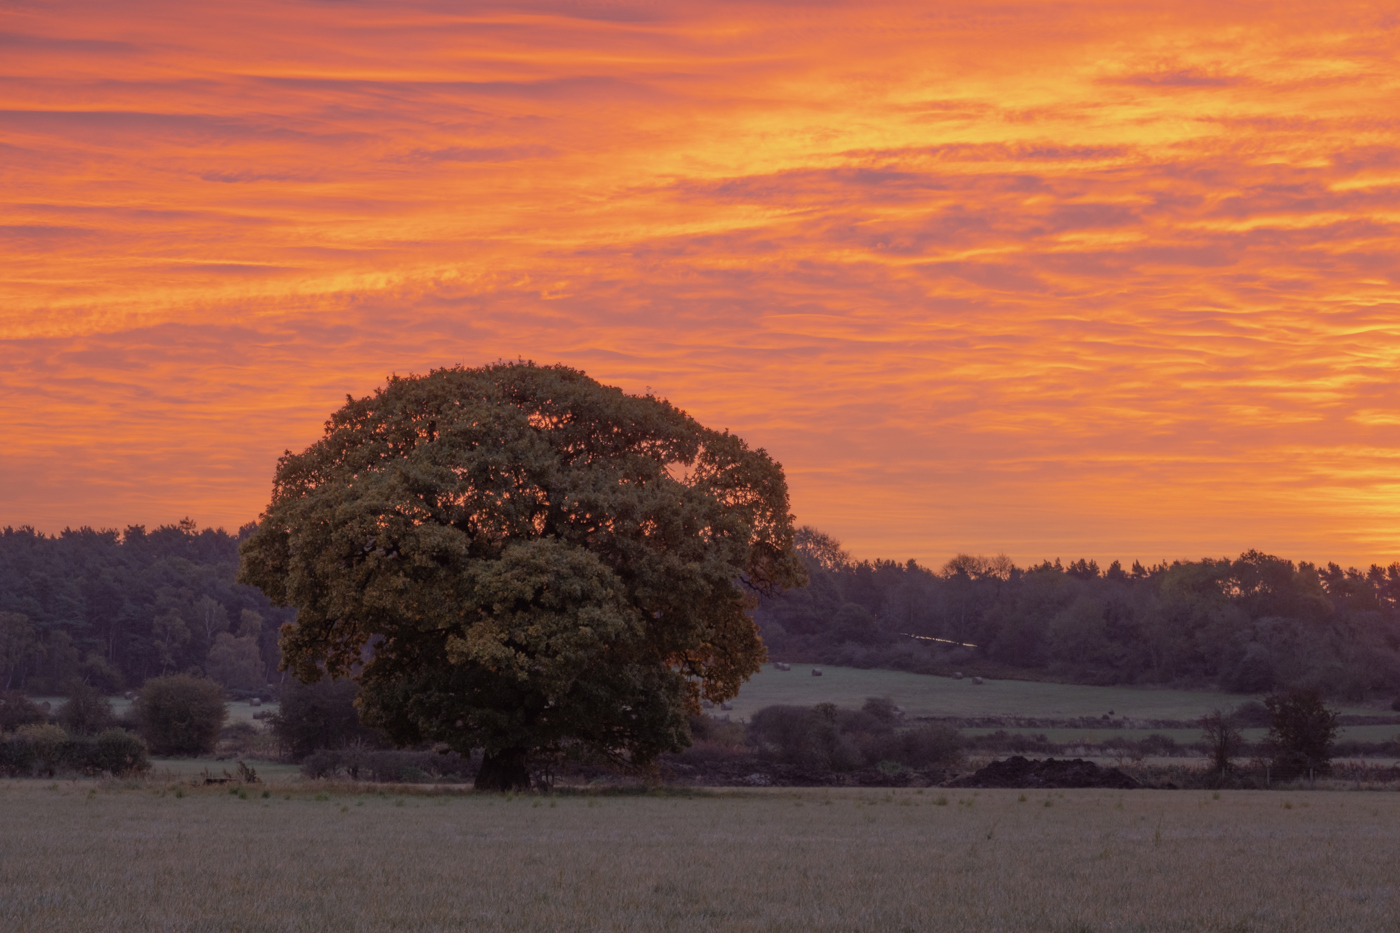  a tree with a sunset in the background